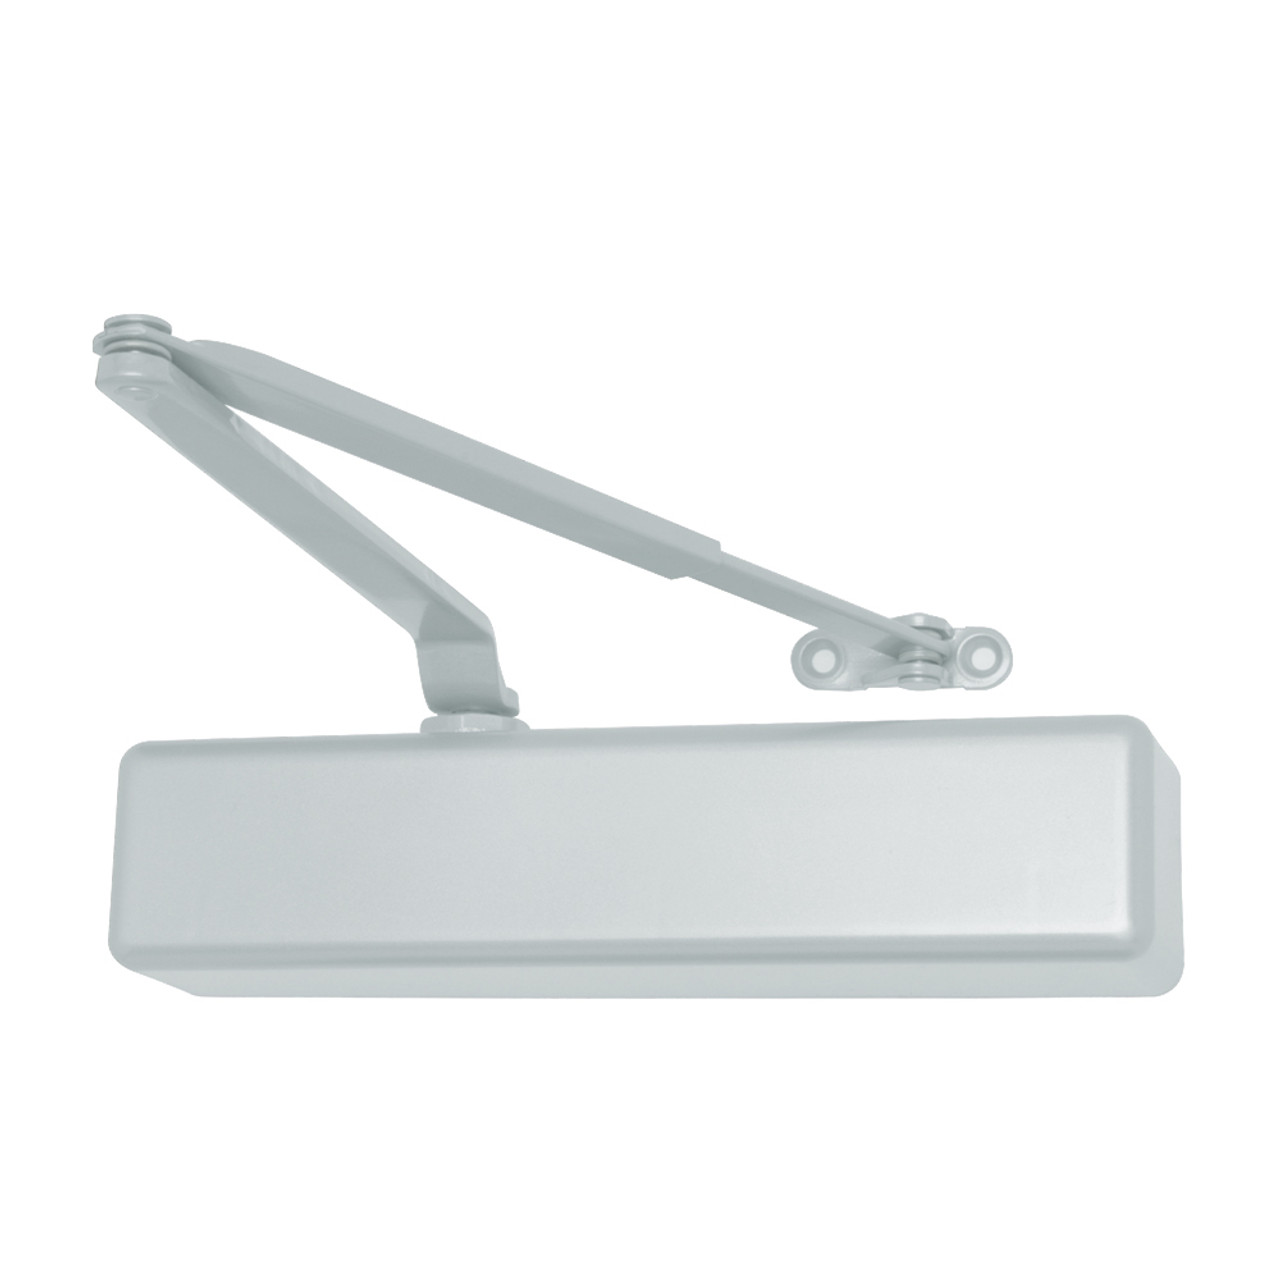 1461-HD-US26 LCN Door Closer with Heavy Duty Arm in Bright Chrome Finish